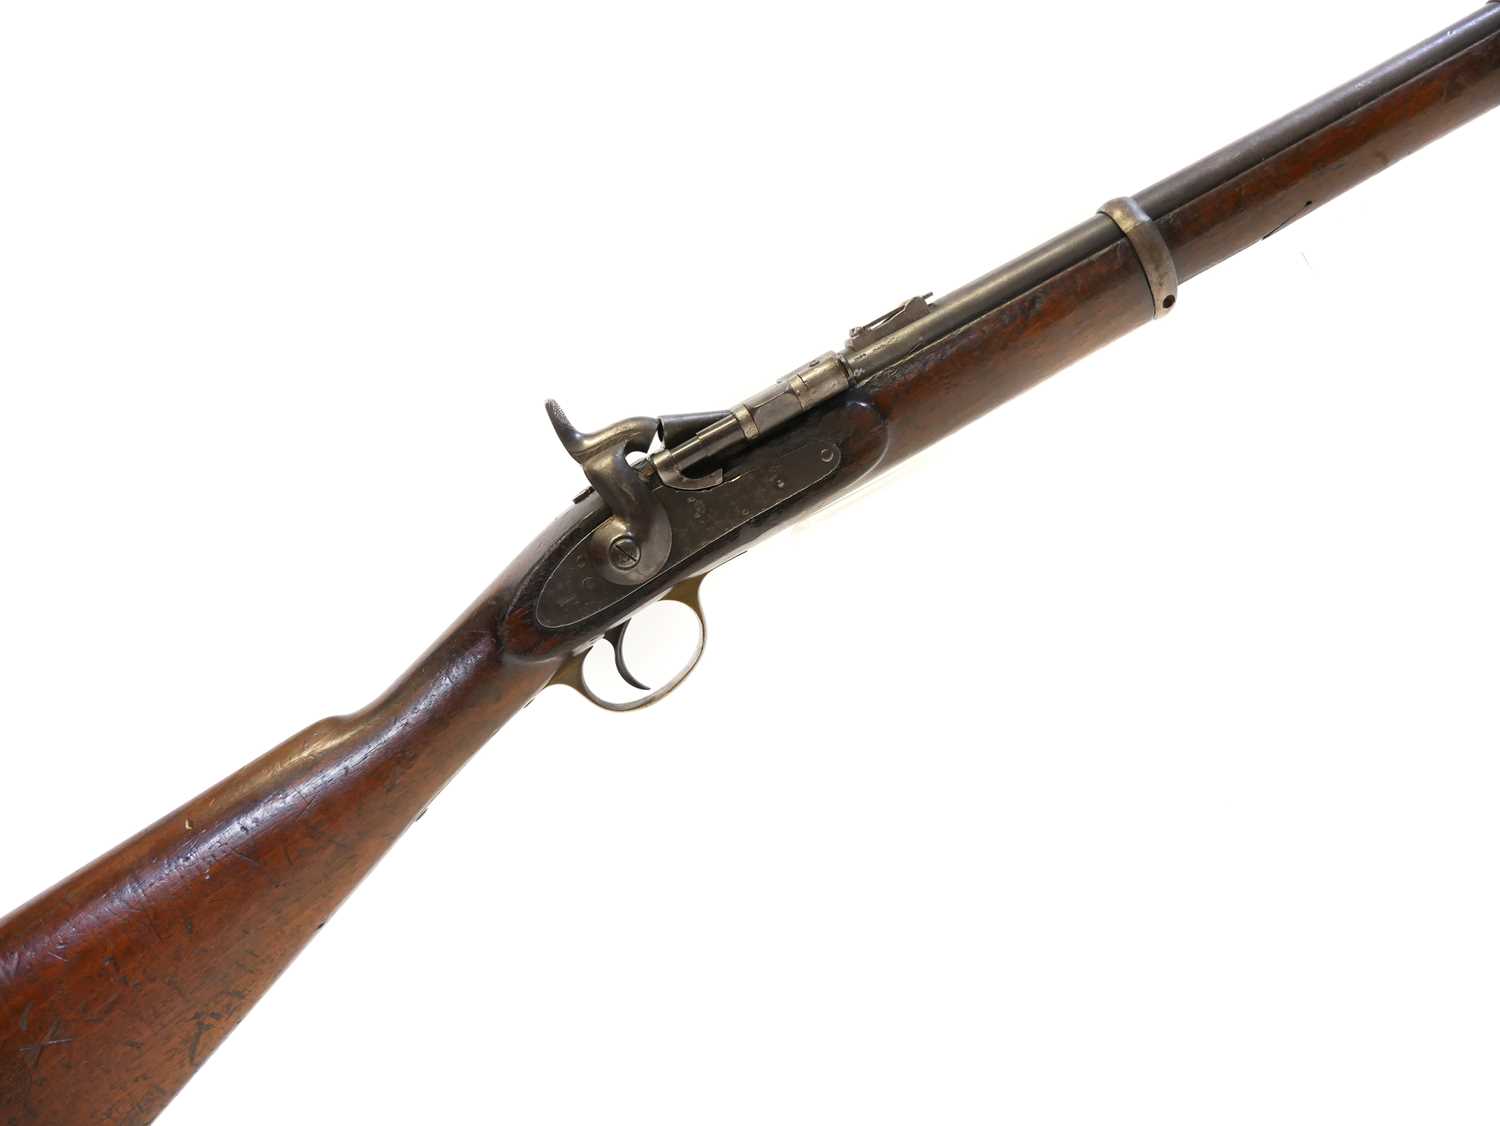 London Small Arms .577 Snider carbine, 21inch barrel with bayonet lug and folding ladder sight,